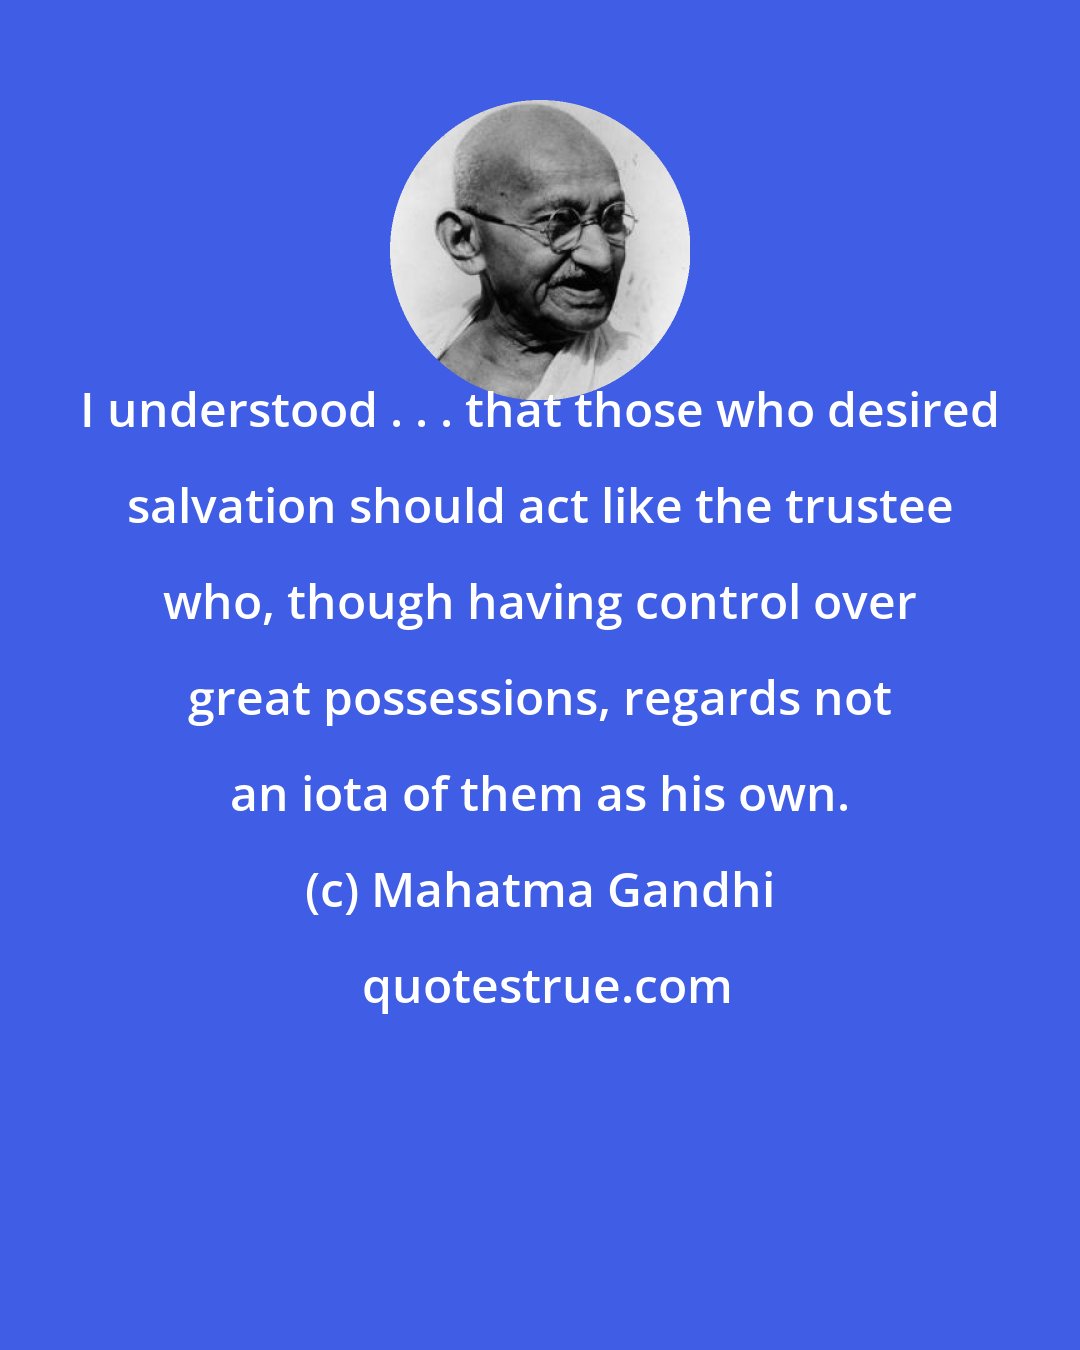 Mahatma Gandhi: I understood . . . that those who desired salvation should act like the trustee who, though having control over great possessions, regards not an iota of them as his own.